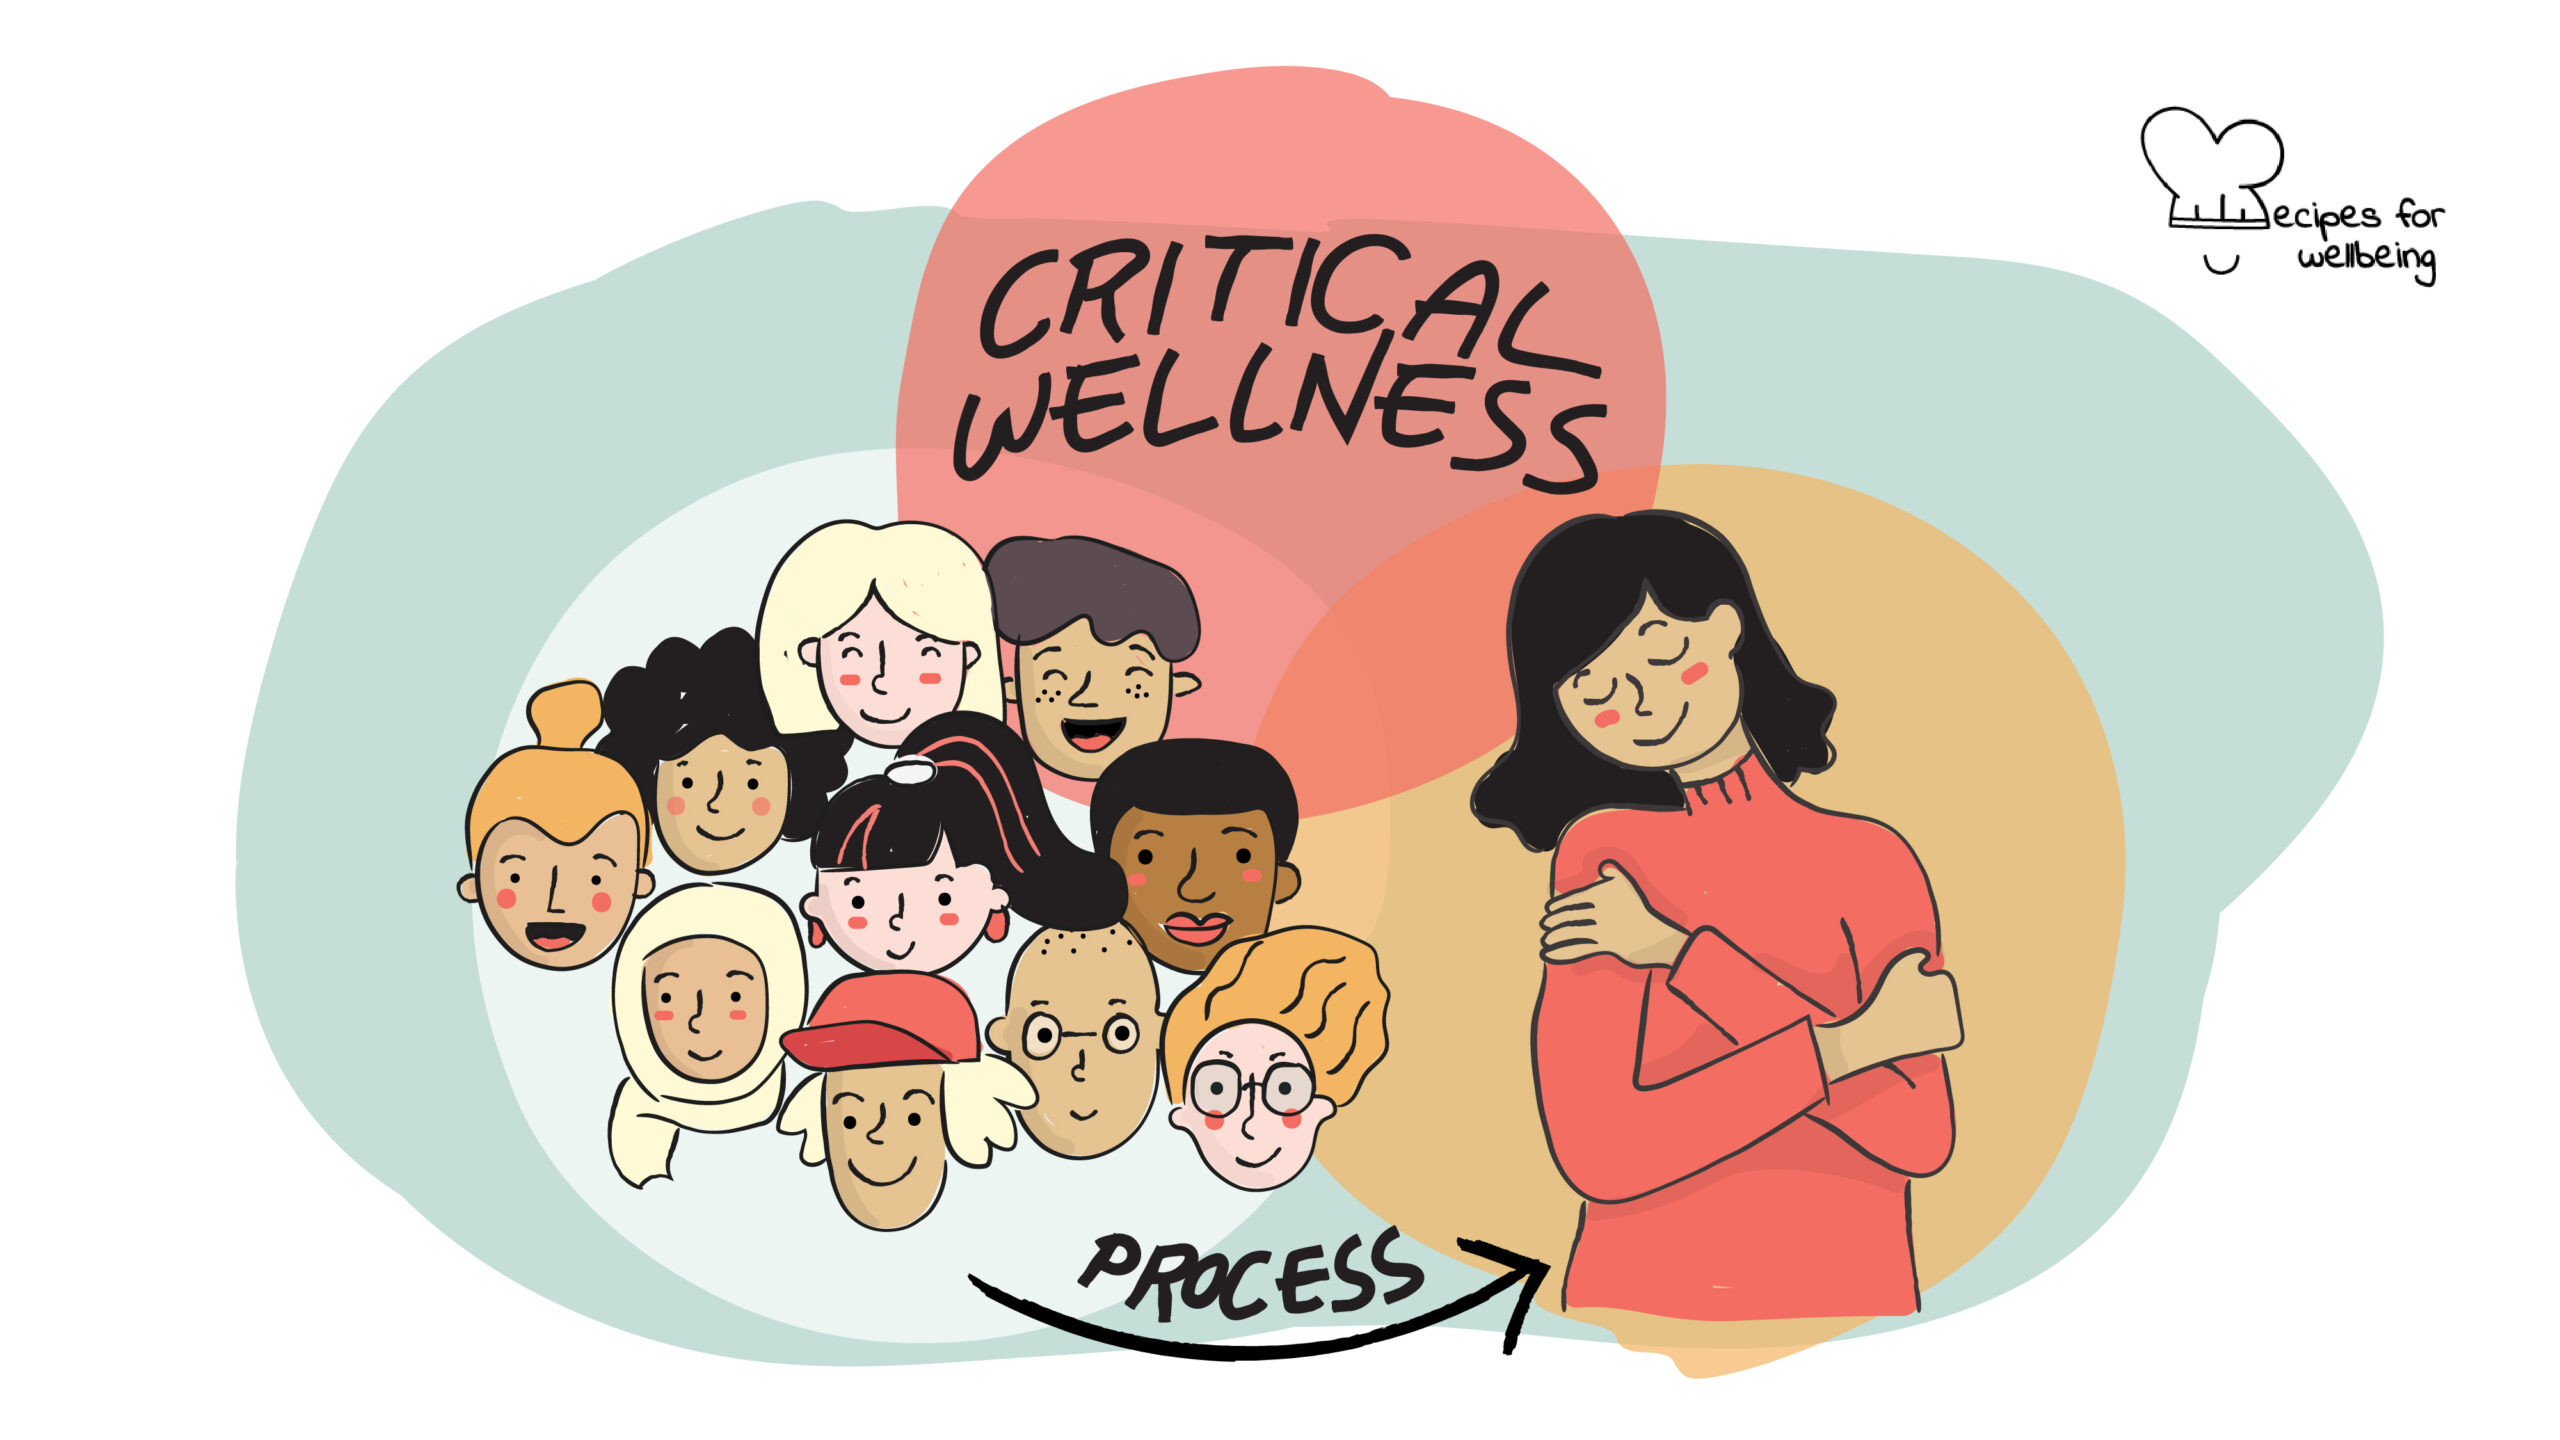 Illustration of a group of people and the words "critical wellness" as a process to overcome racism. © Recipes for Wellbeing